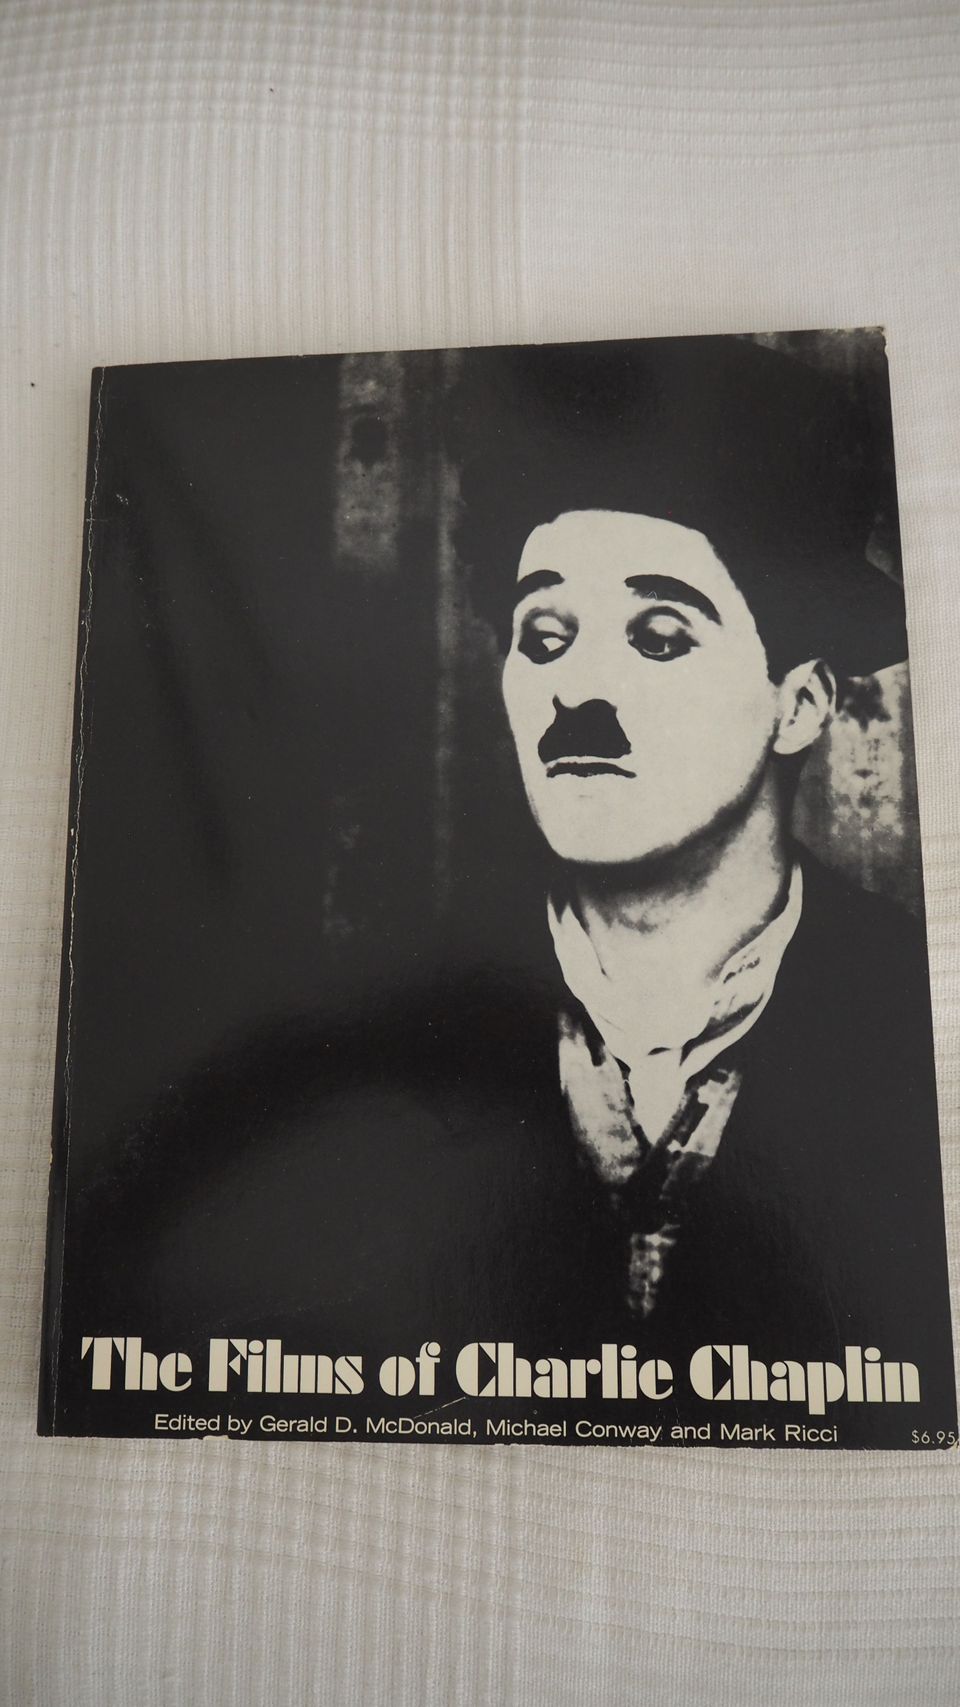 McDonald, Conway: The Films of Charlie Chaplin